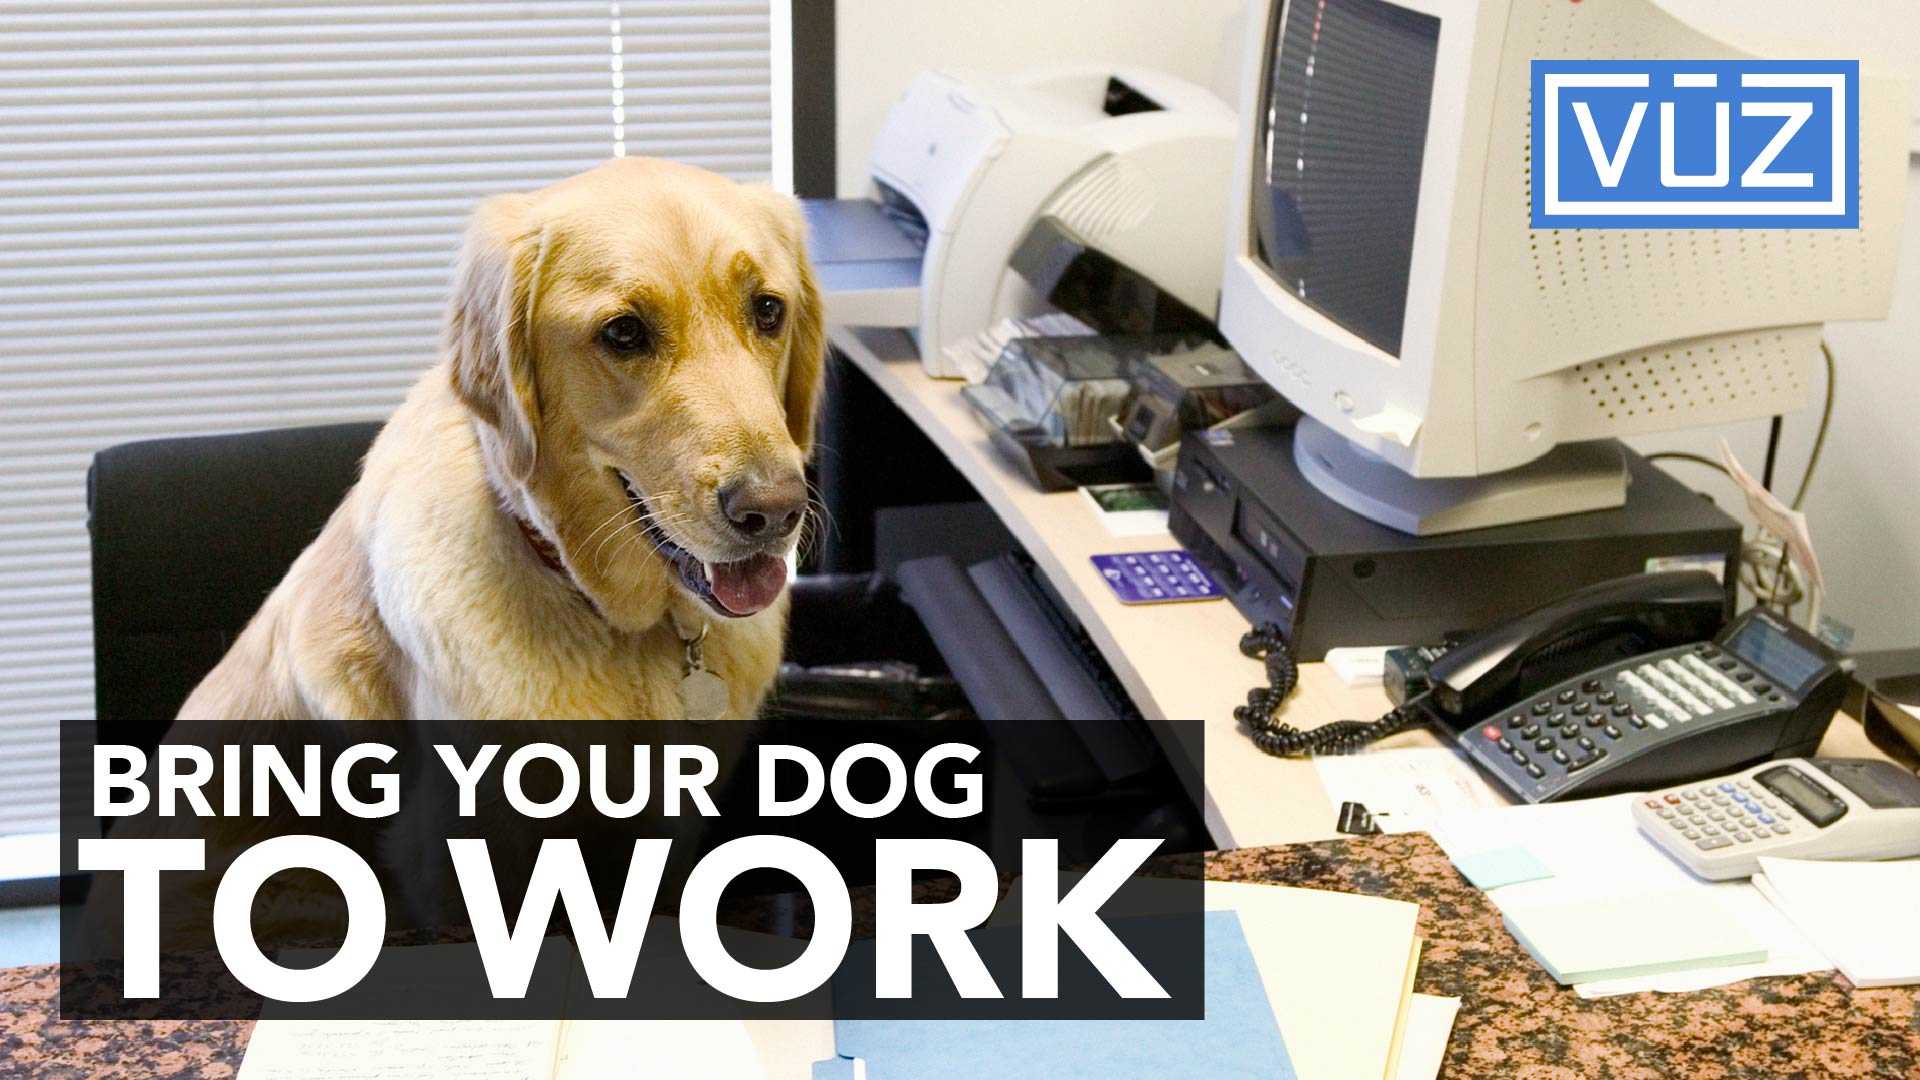 Is Your Workplace Pet-Friendly?